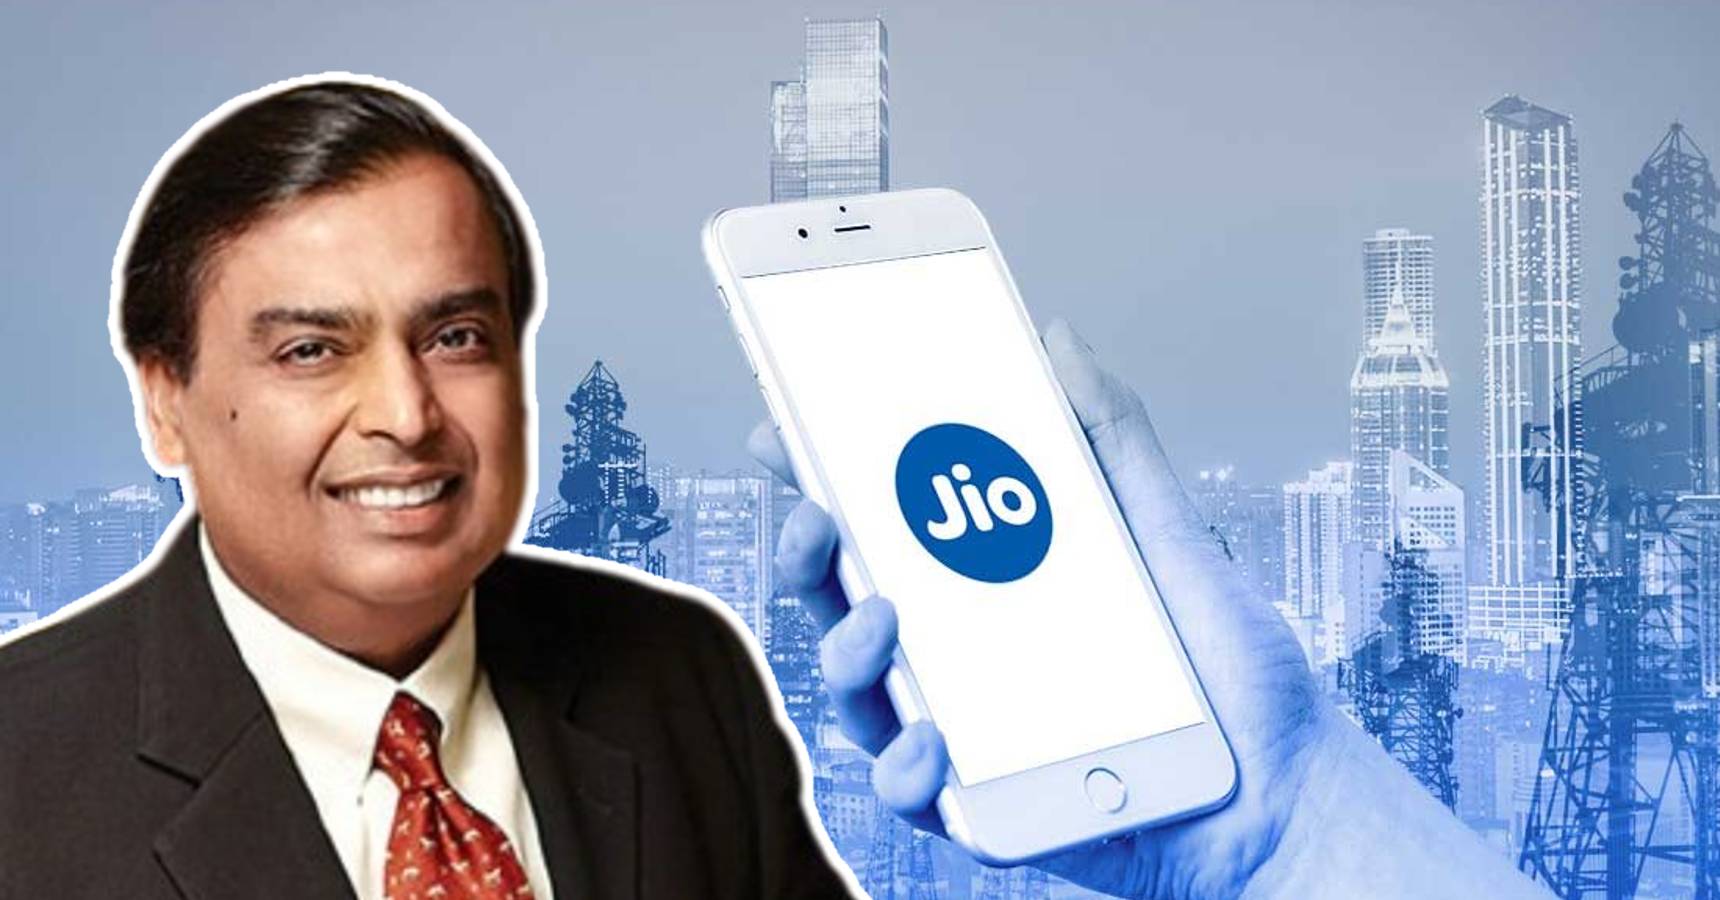 Jio has come up with great plans for customers